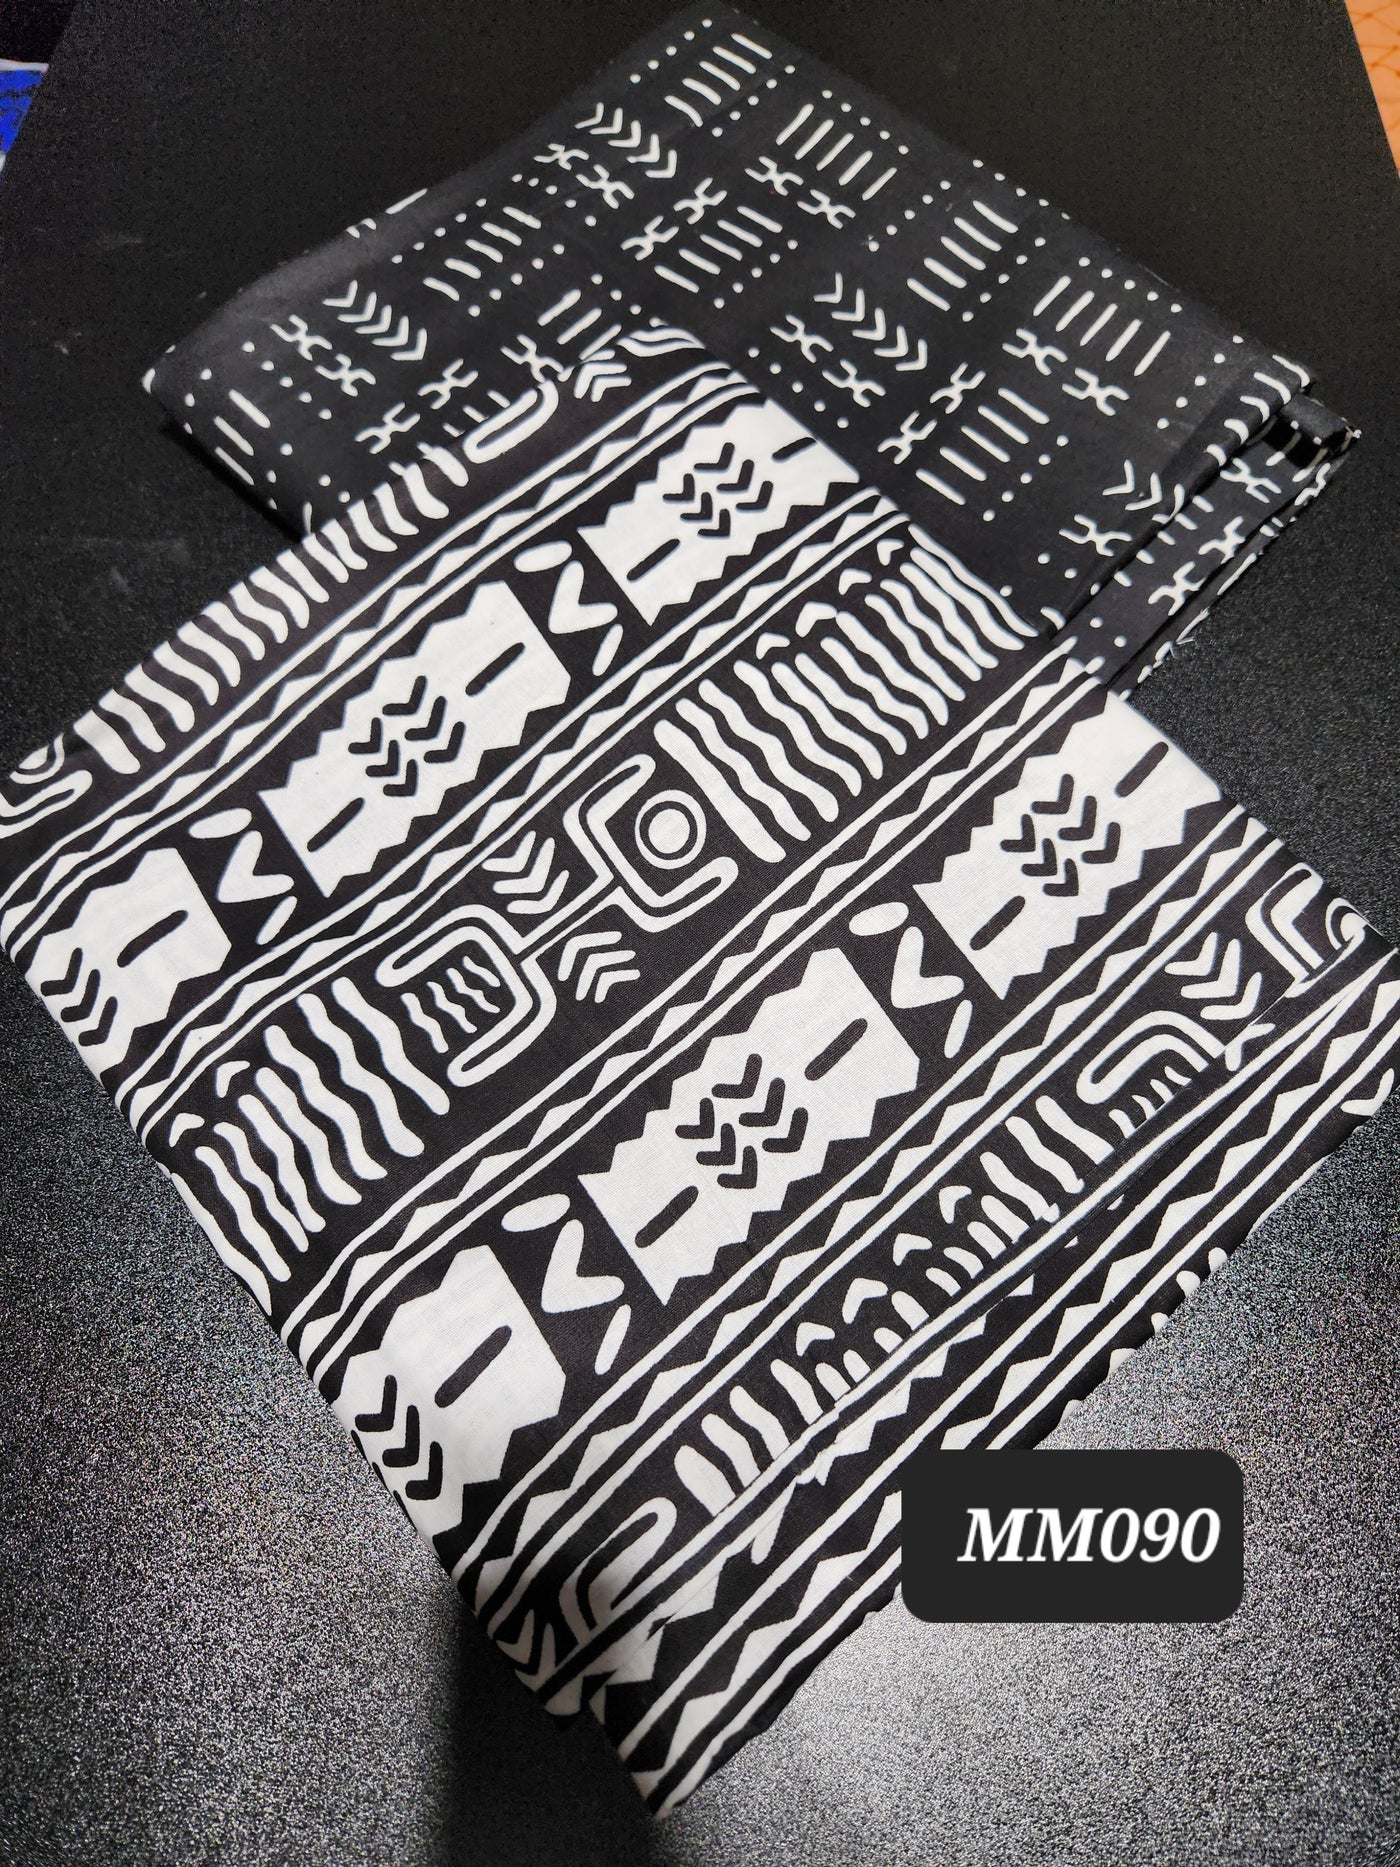 Mix and Match African Fabric, MM090